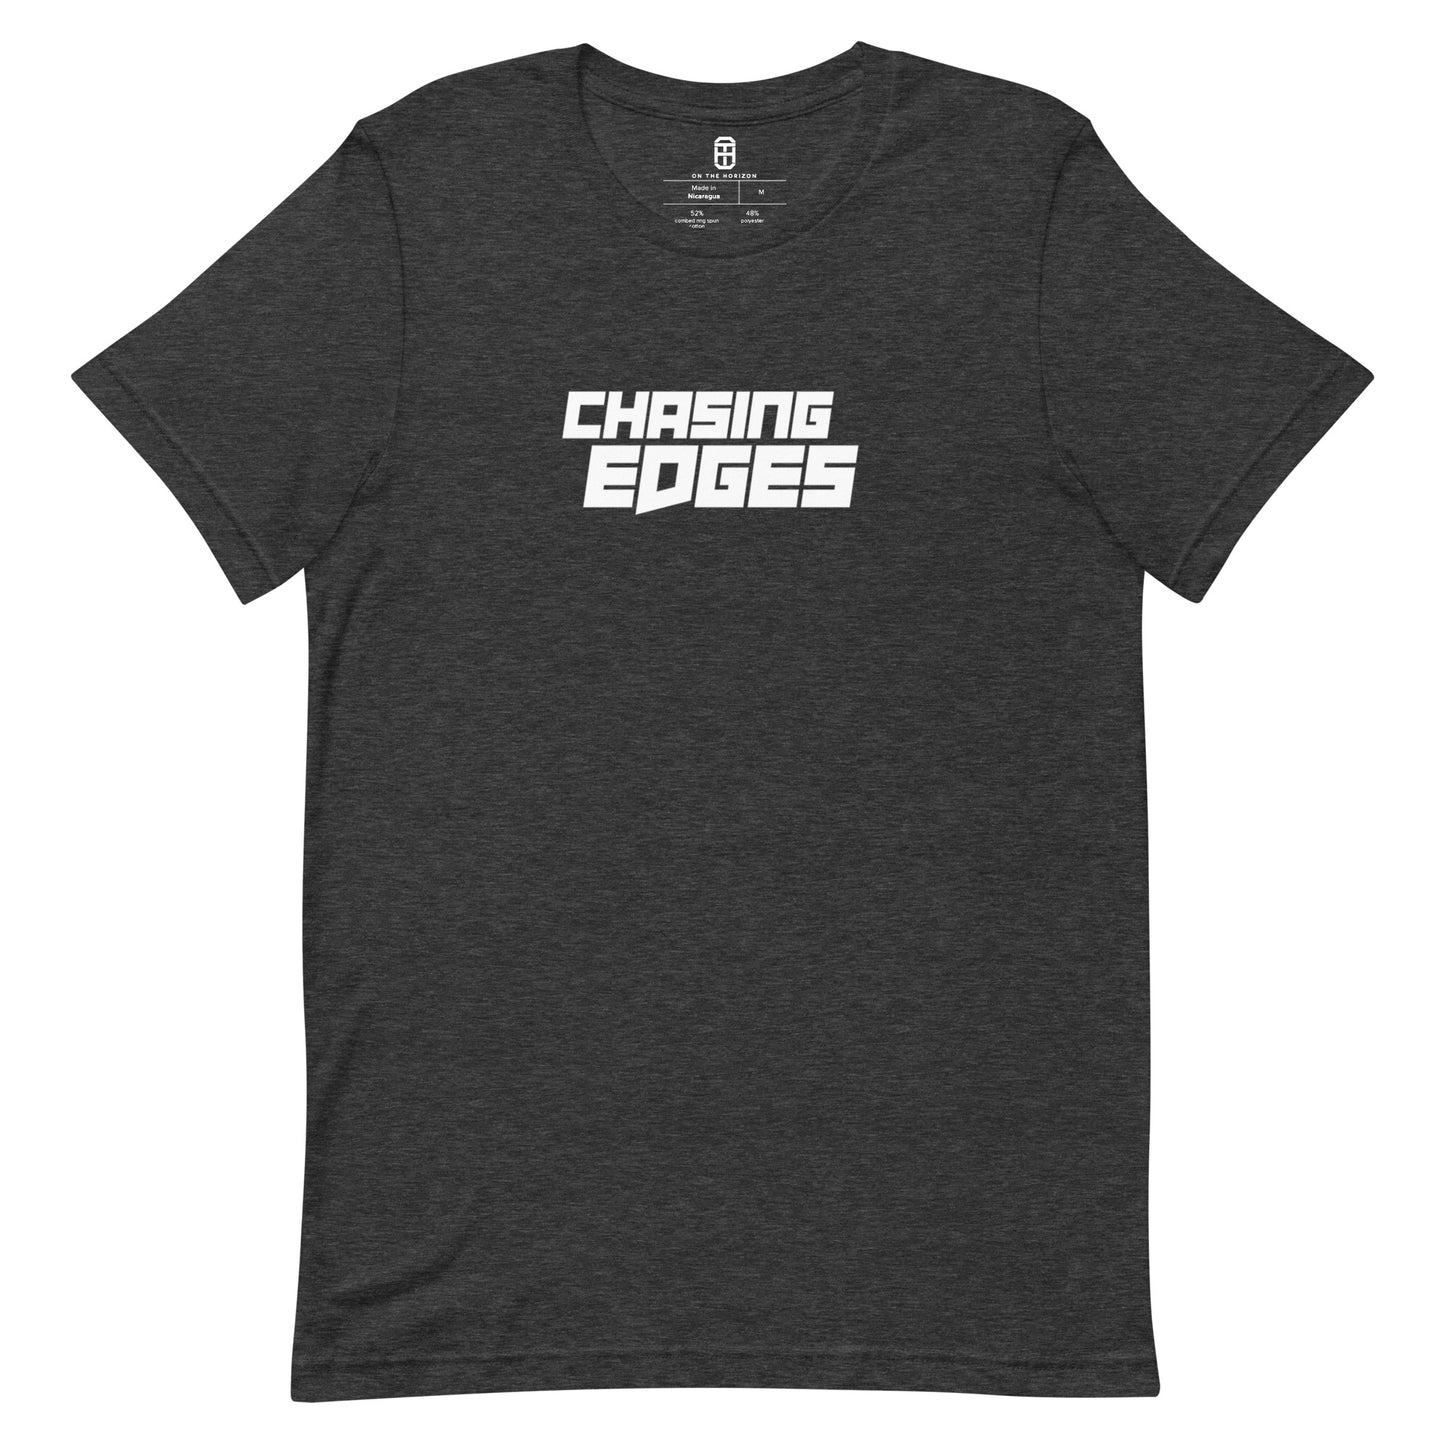 CHASING EDGES DON'T BE FAT T-SHIRT (MORE COLORS)